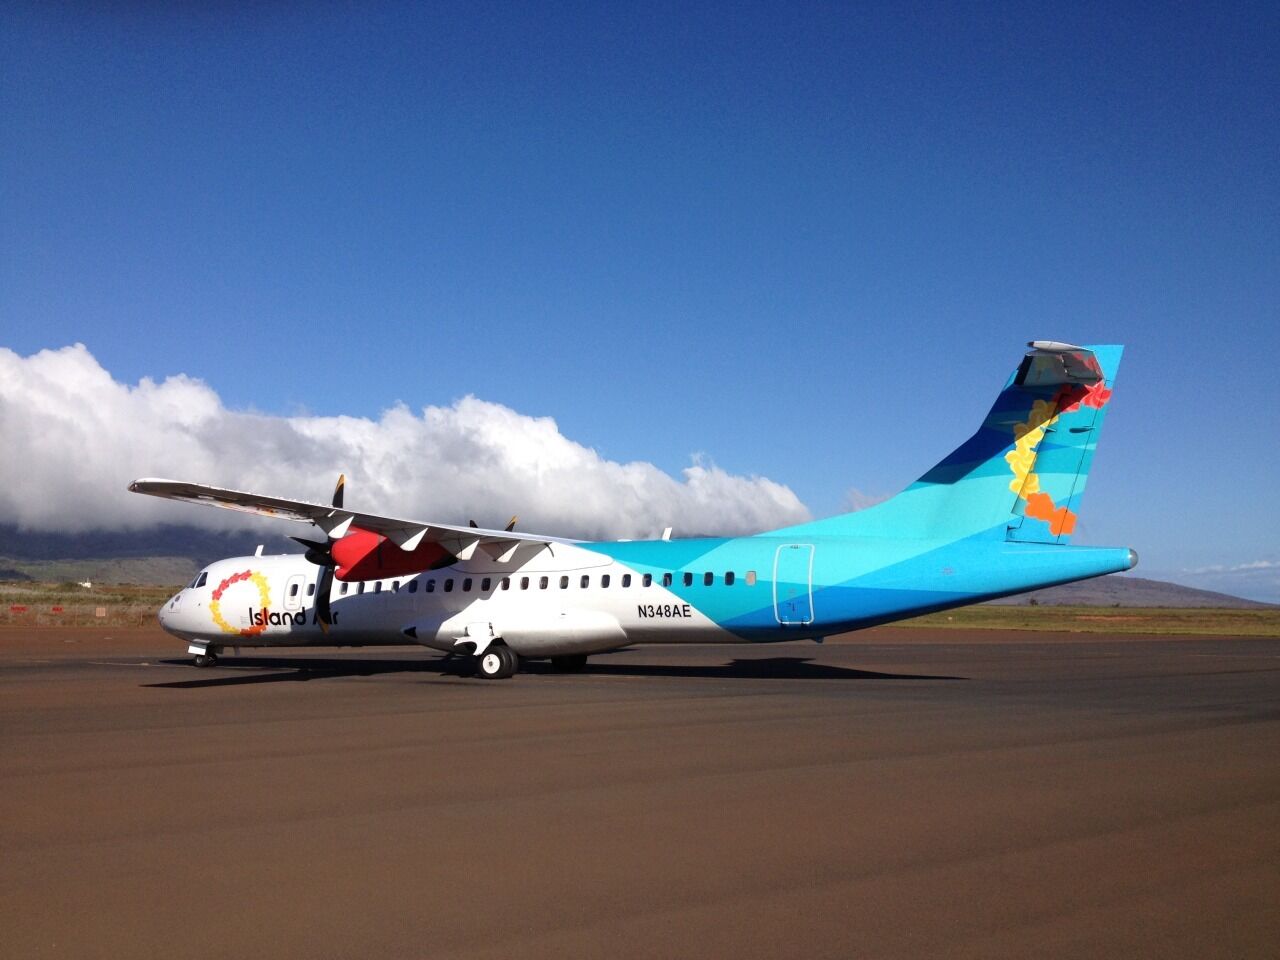 Airplane livery of Island Air airline in Hawaii